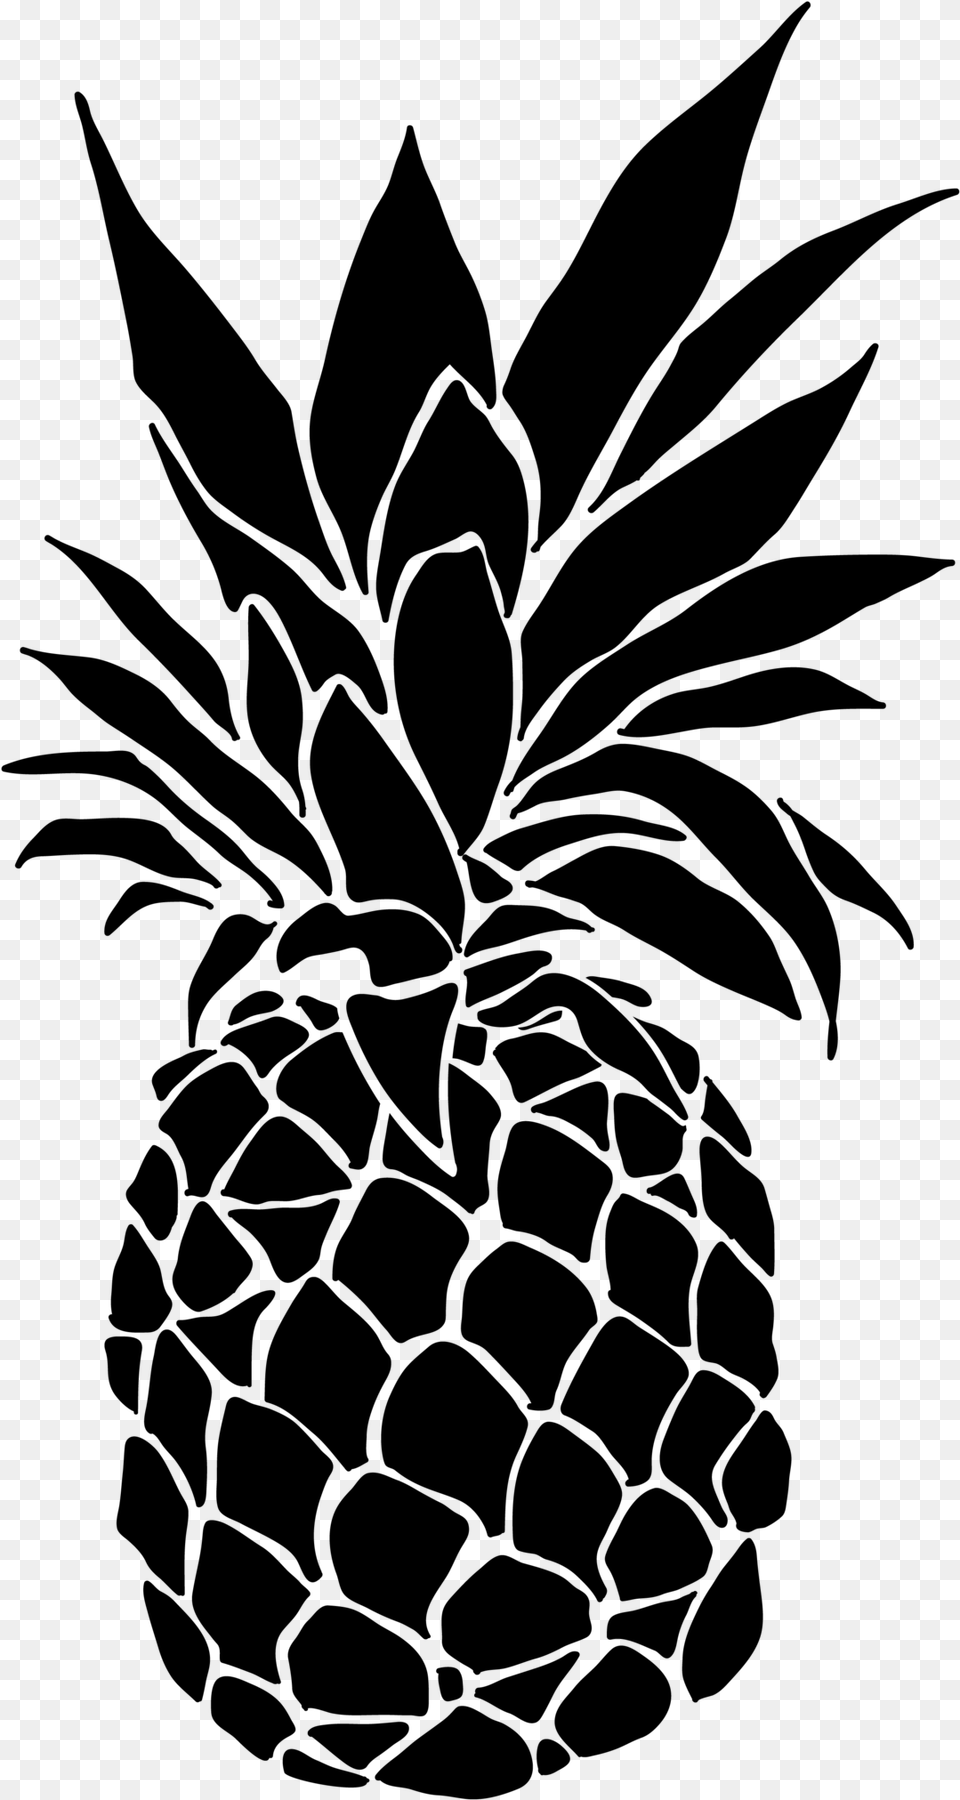 Black And White Pineapple Painting Ideas Black And White, Gray Free Png Download